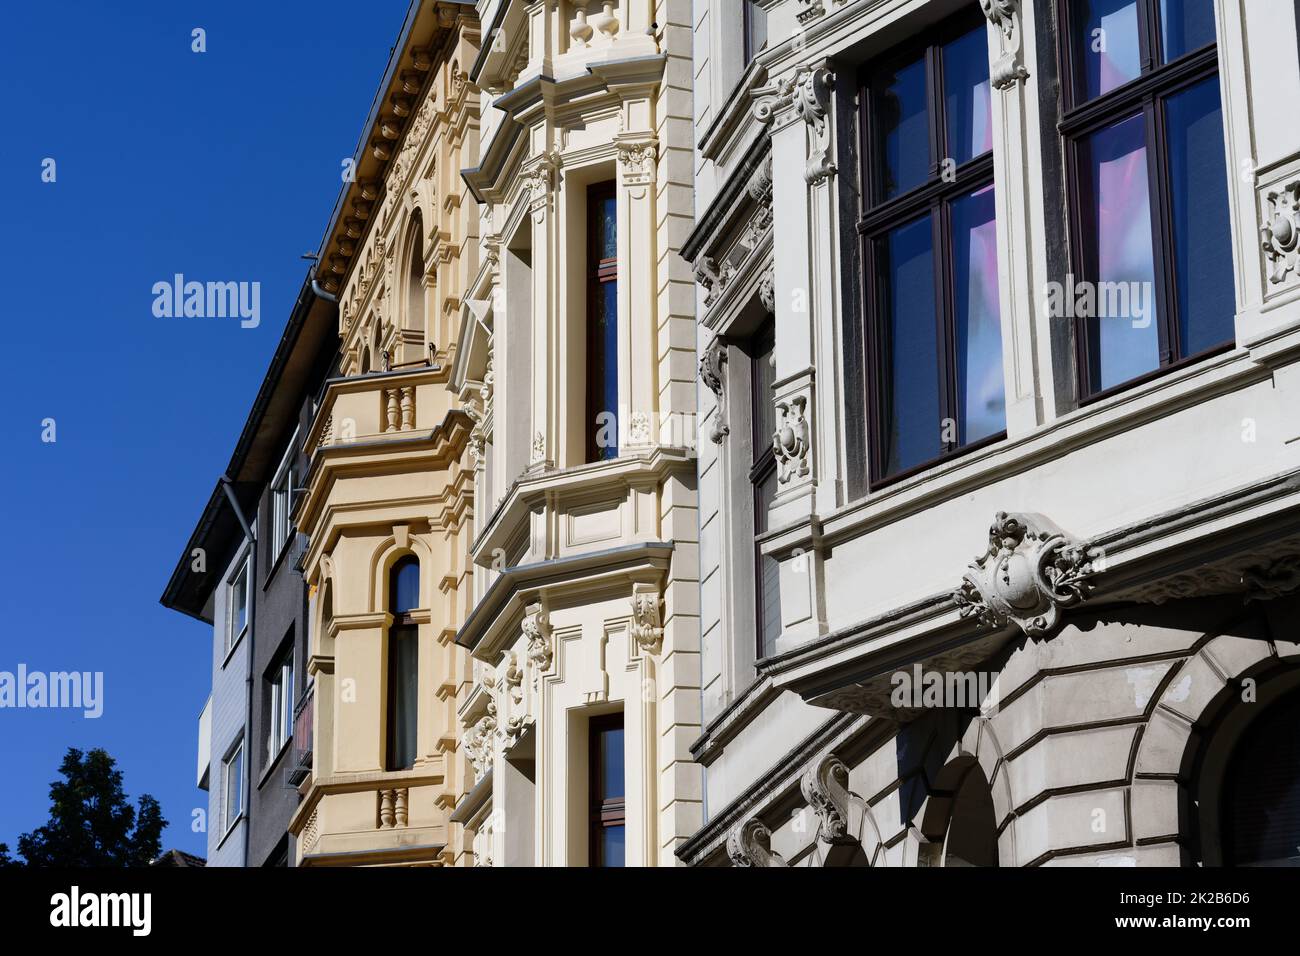 beautifully restored historic facades in the belgian quarter of cologne Stock Photo